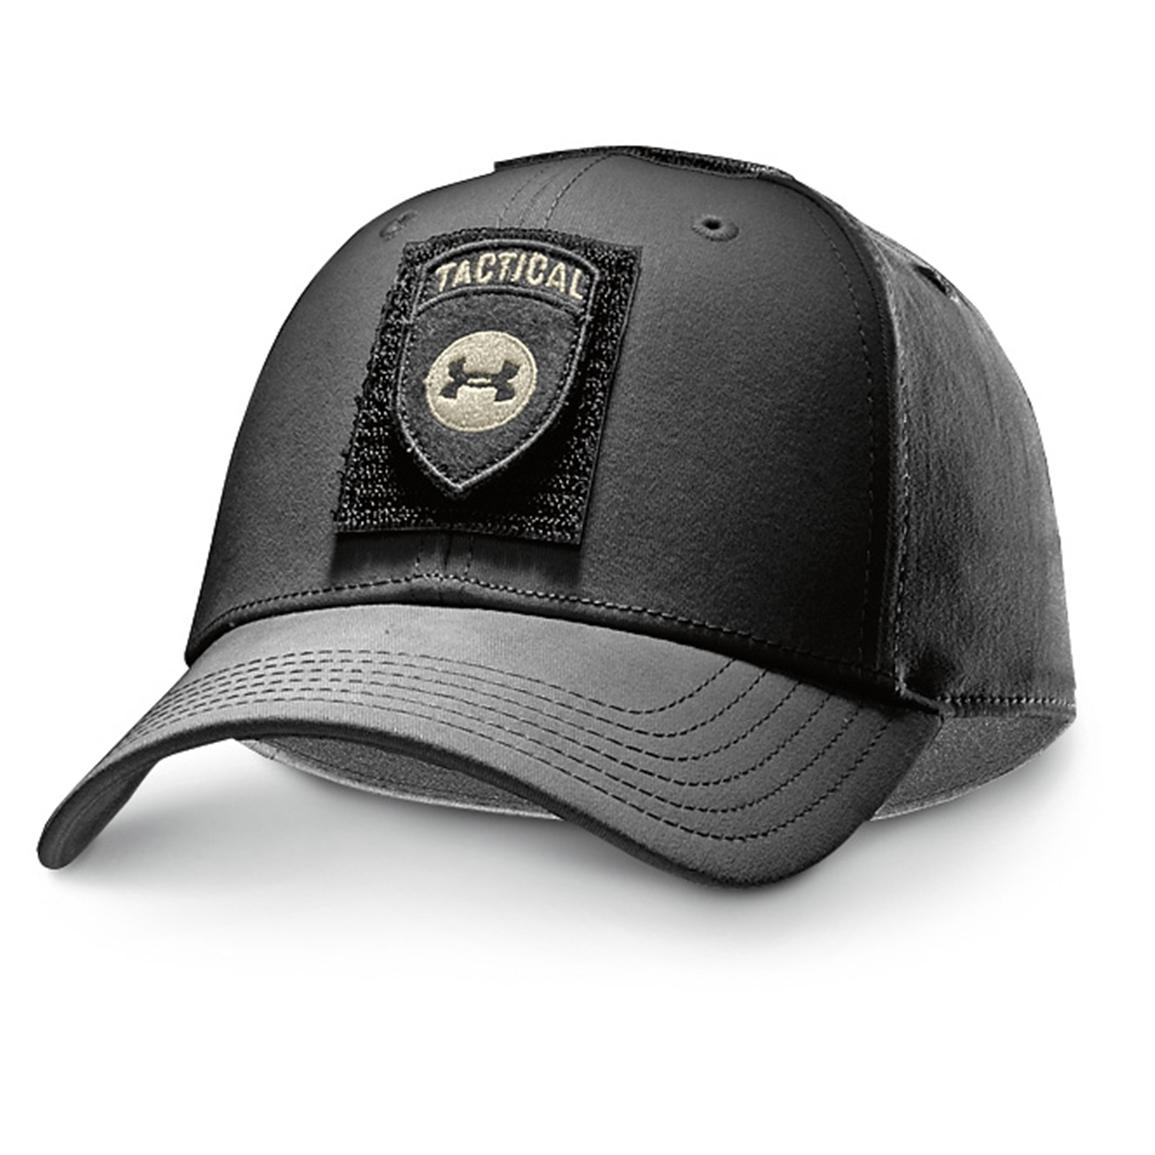 Under Armour Tactical Ir Patch Hat